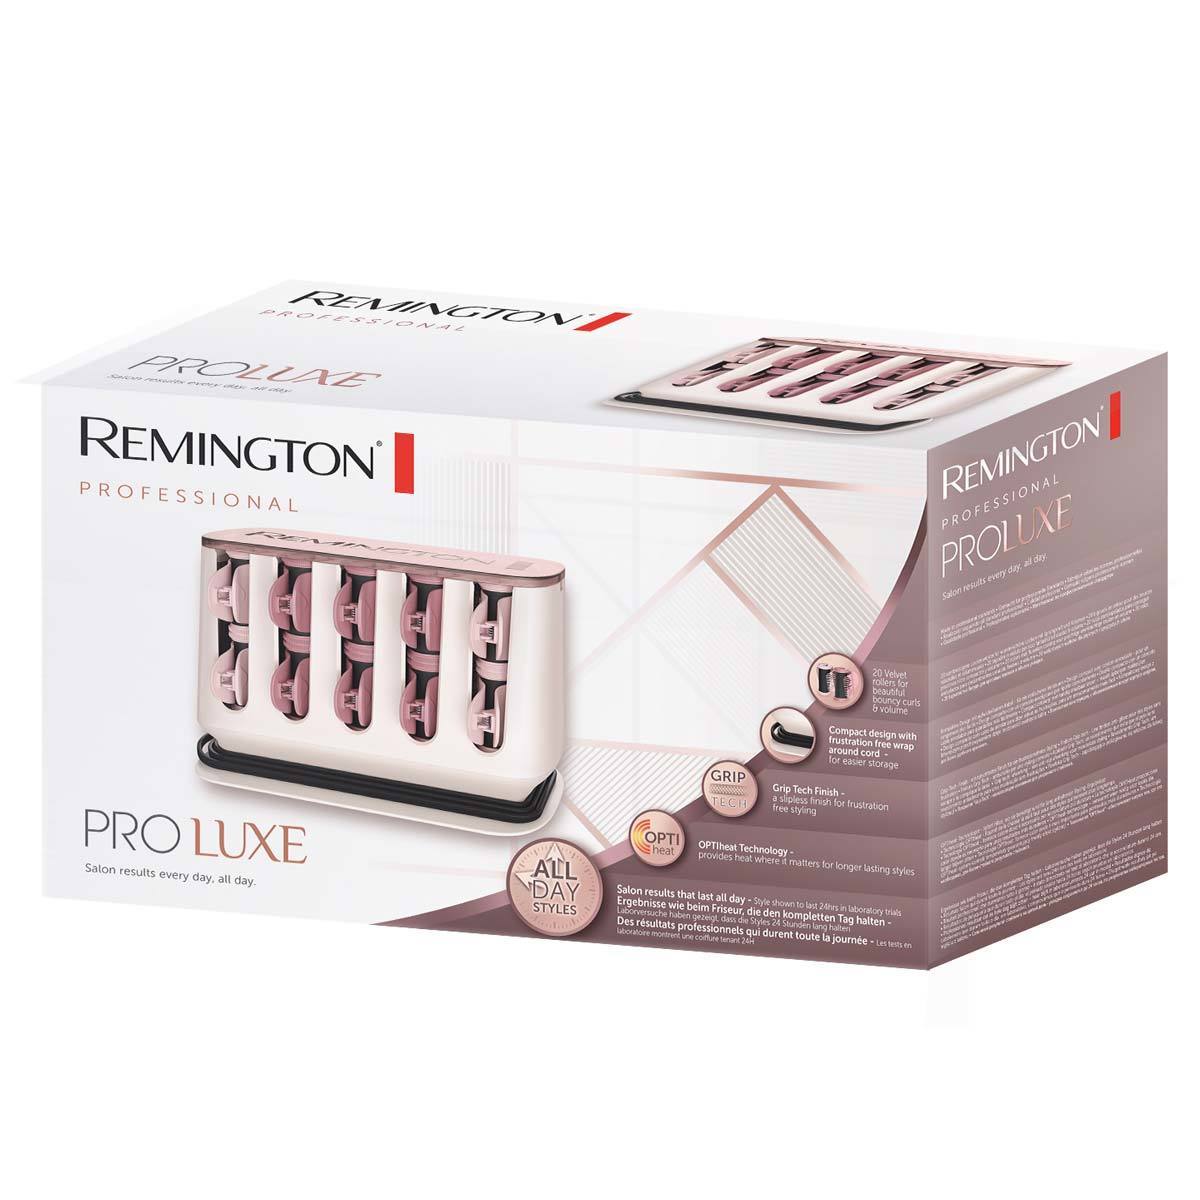 Remington PROluxe Hair Rollers, H9100